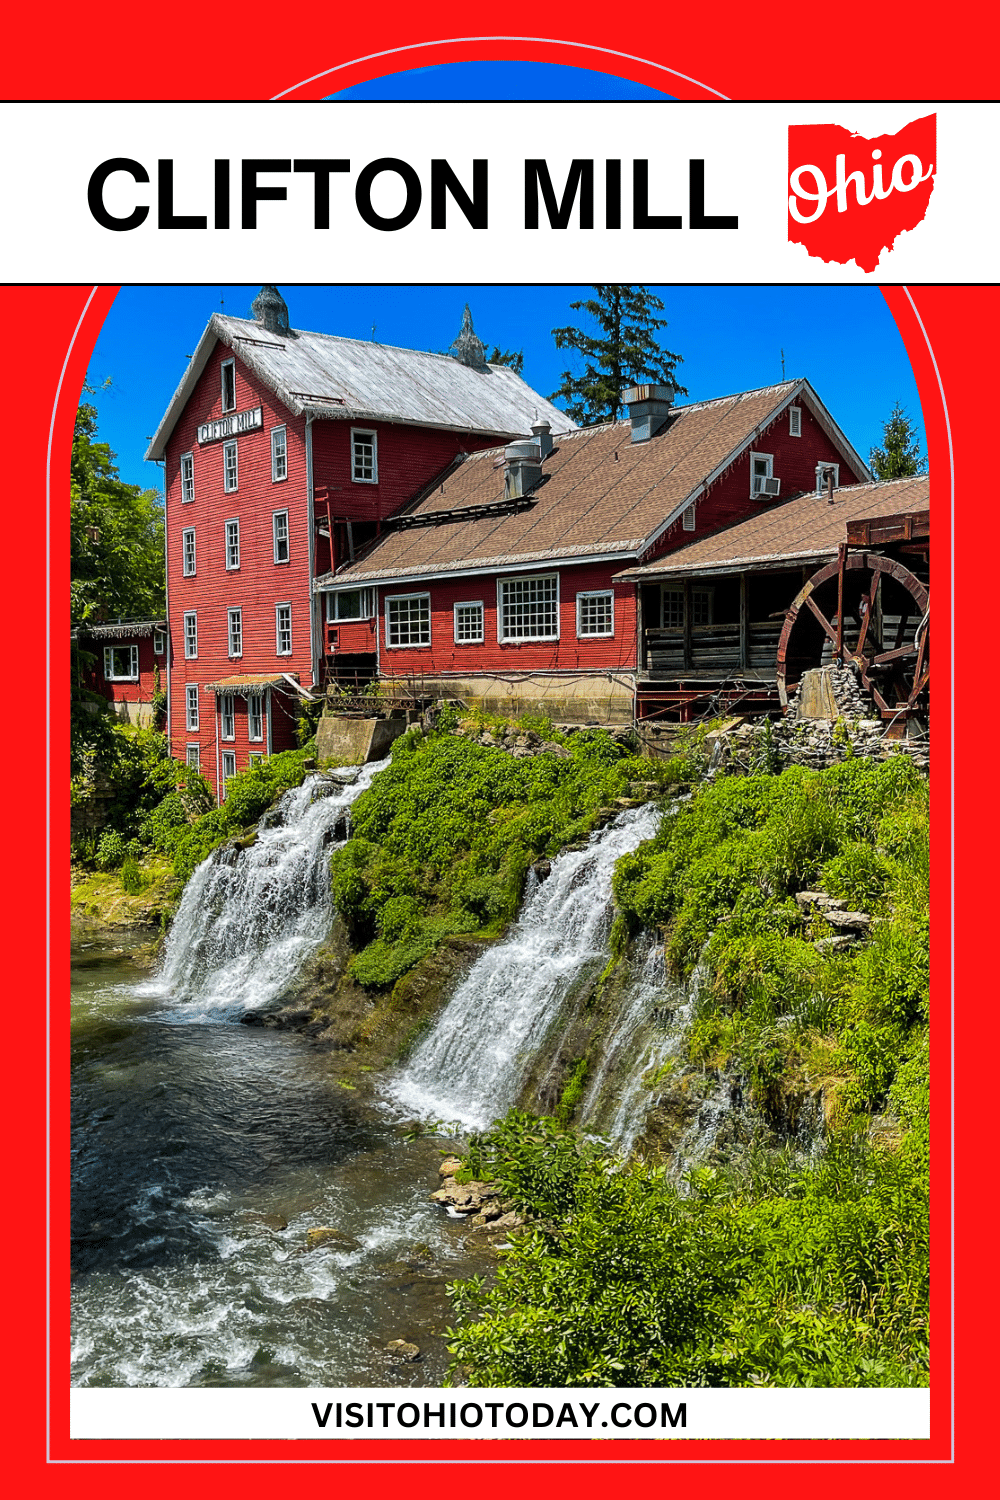 Clifton Mill is one of the largest water-powered grist mills still in existence. You can see the mill working, taking water from the Little Miami River and converting it to power to activate the stones to grind grain into flour. The town of Clifton is 3.5 miles east of Yellow Springs